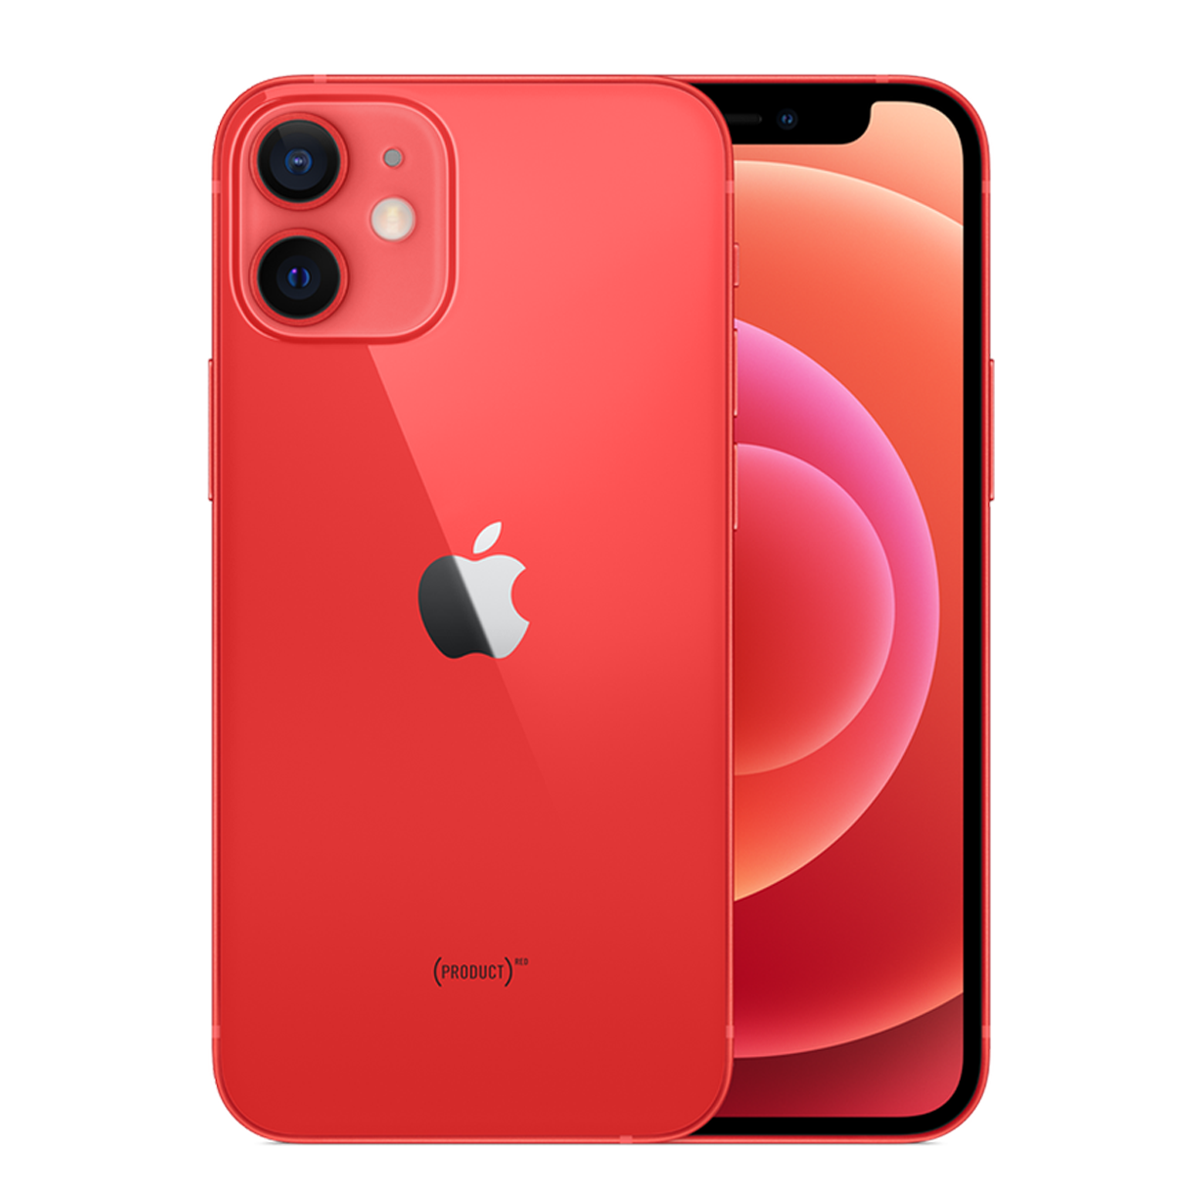 iPhone 12 mini, (PRODUCT)Red, 64GB (Official Stock)